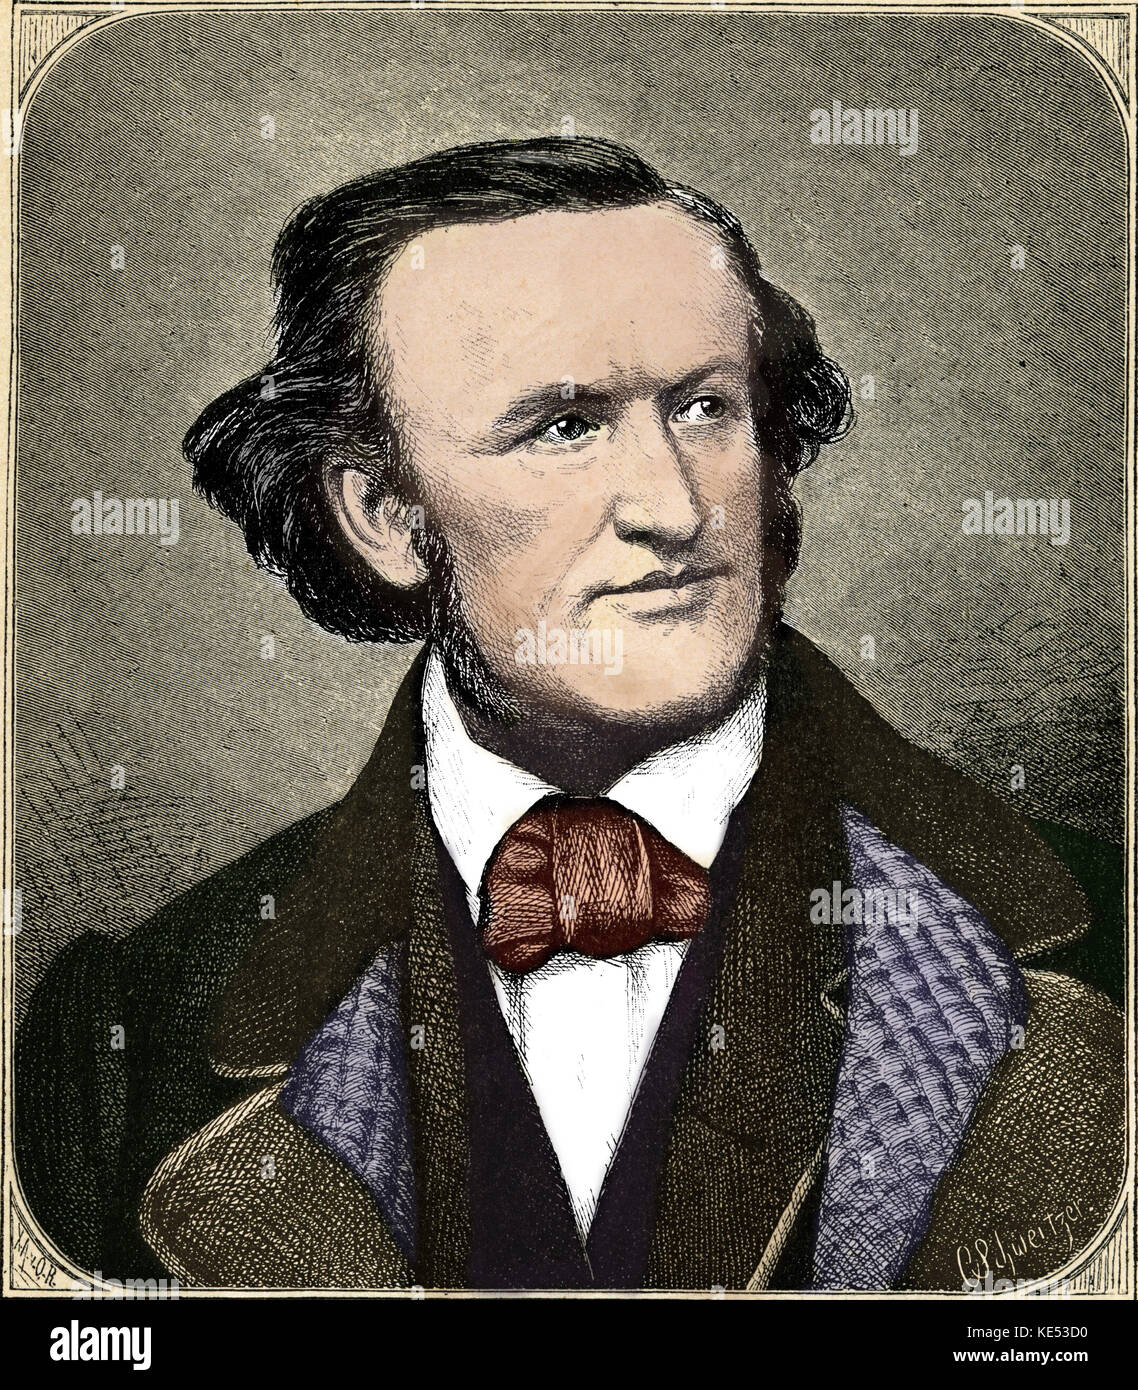 Richard Wagner, after an engraving by C.Schweitzer. German composer & author, 22 May 1813 - 13 February 1883. Colourised version. Stock Photo